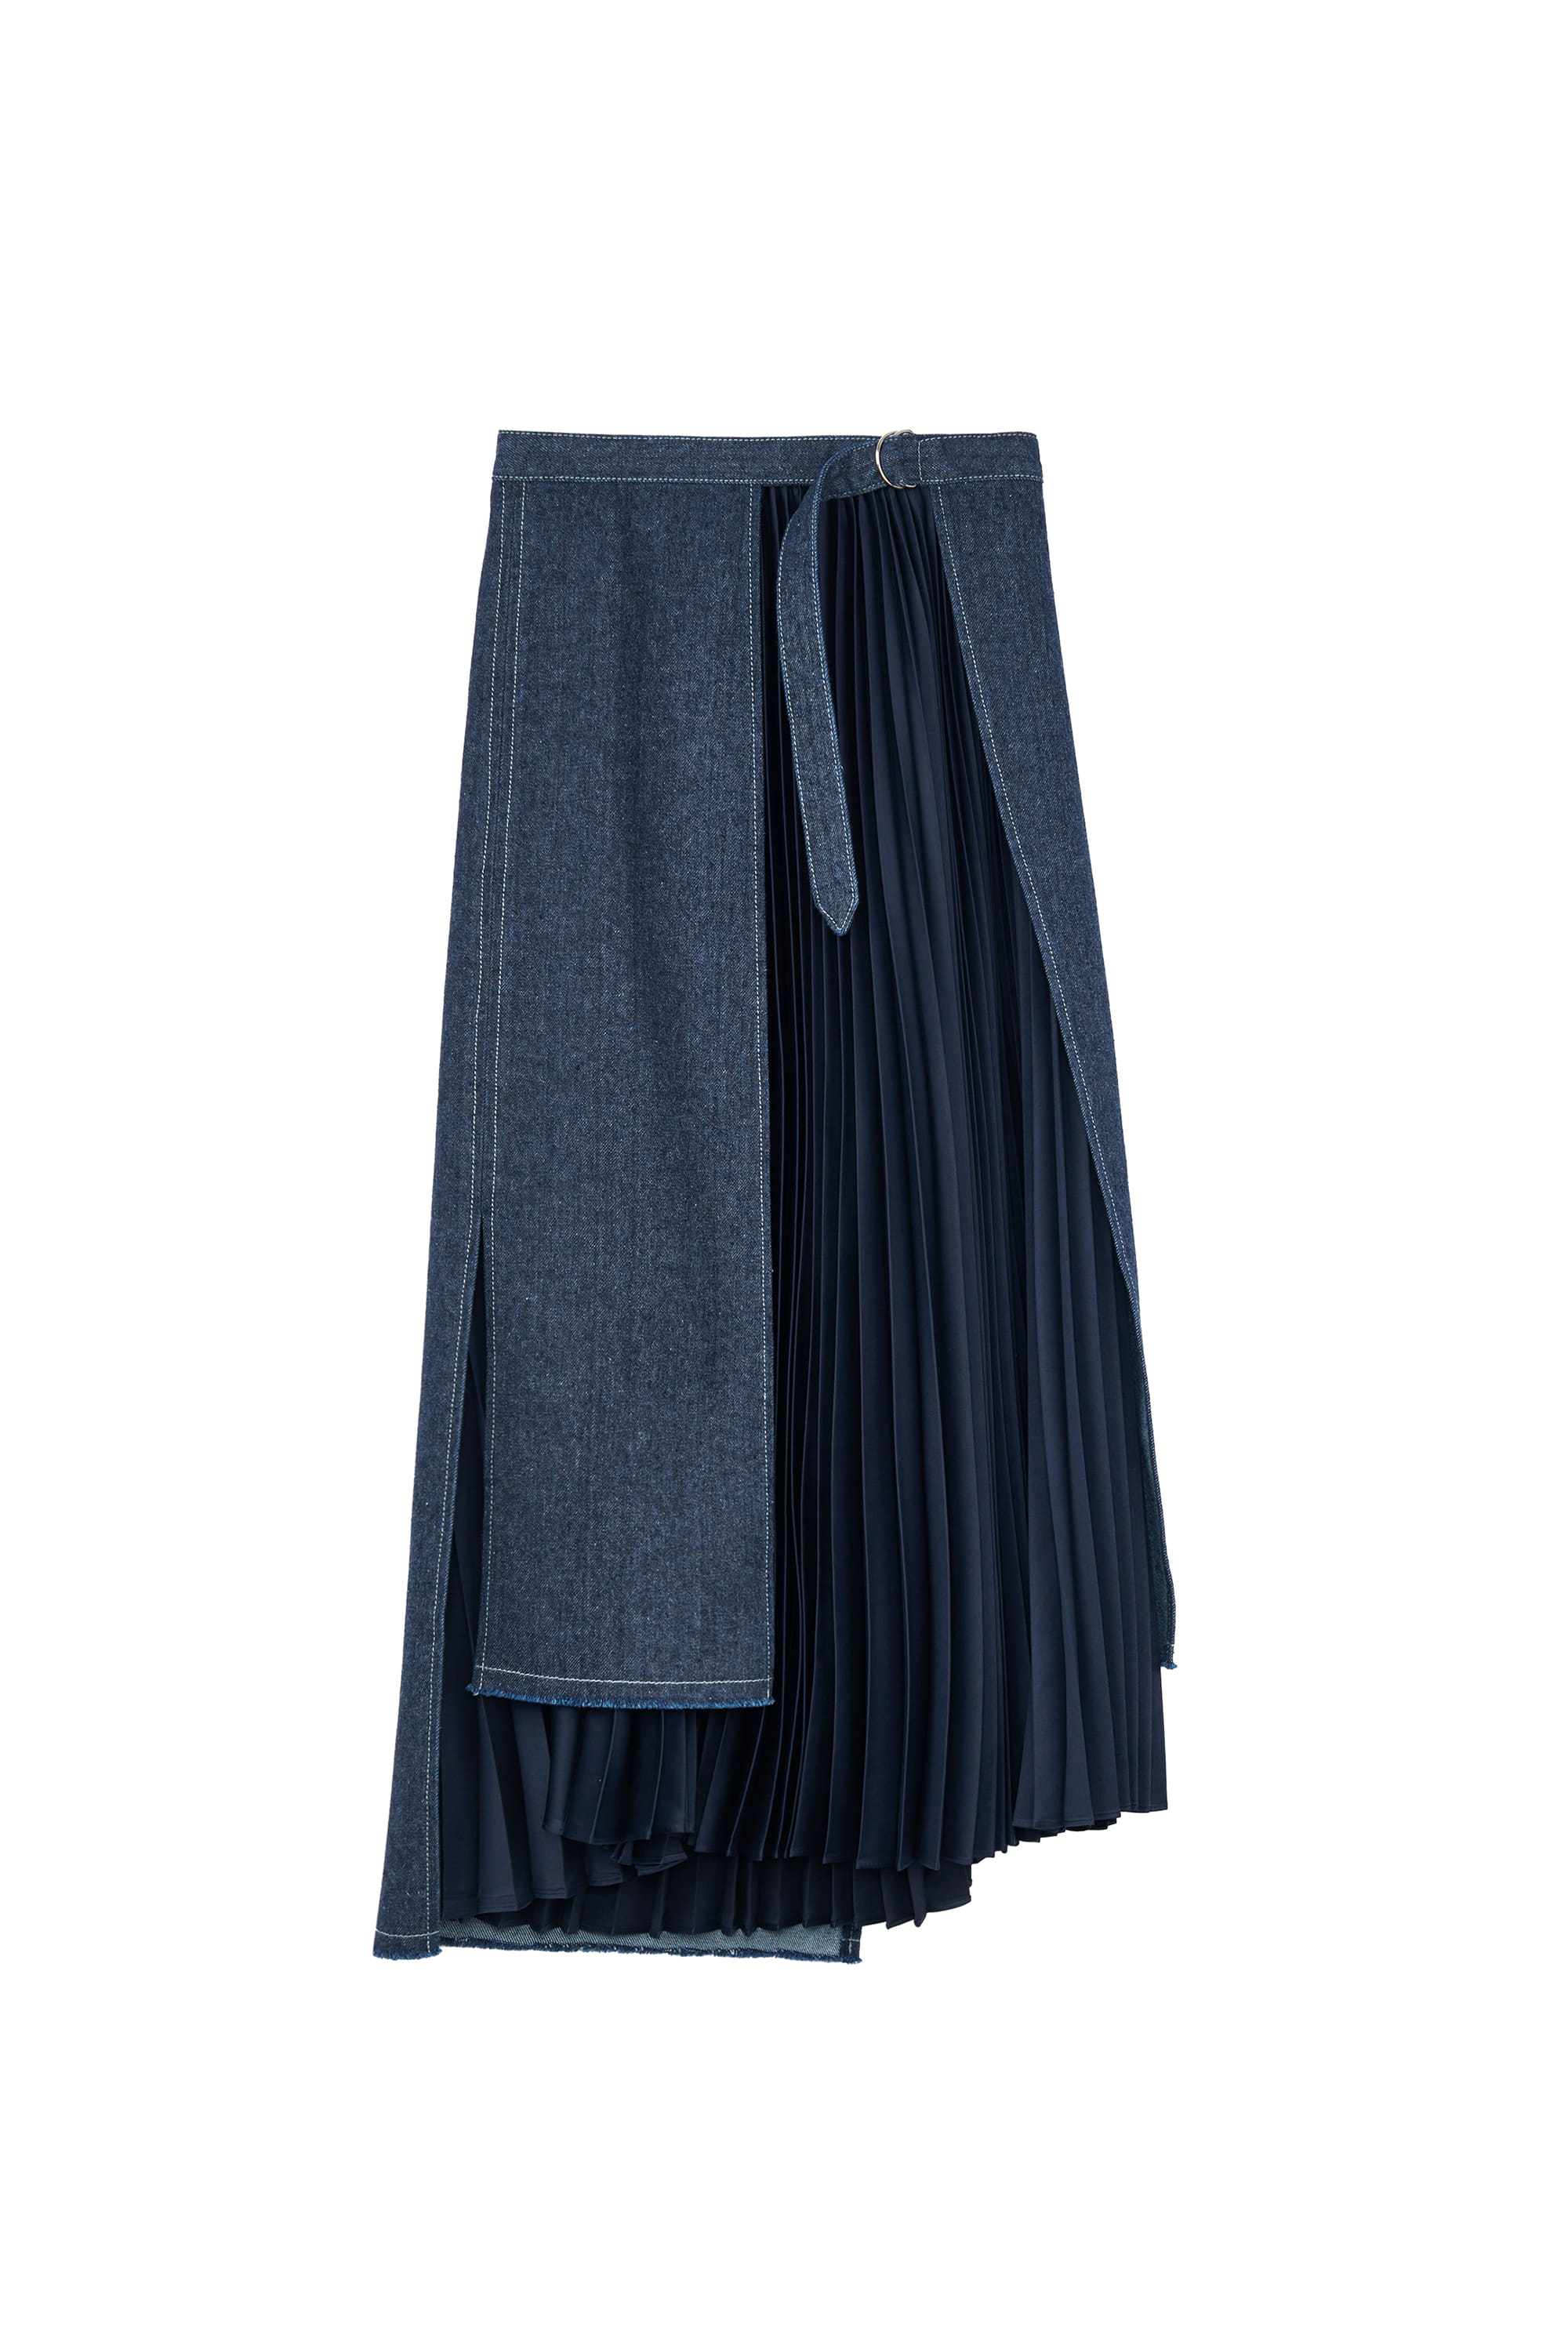 DEMEULE TWO PIECES SKIRT_NAVY